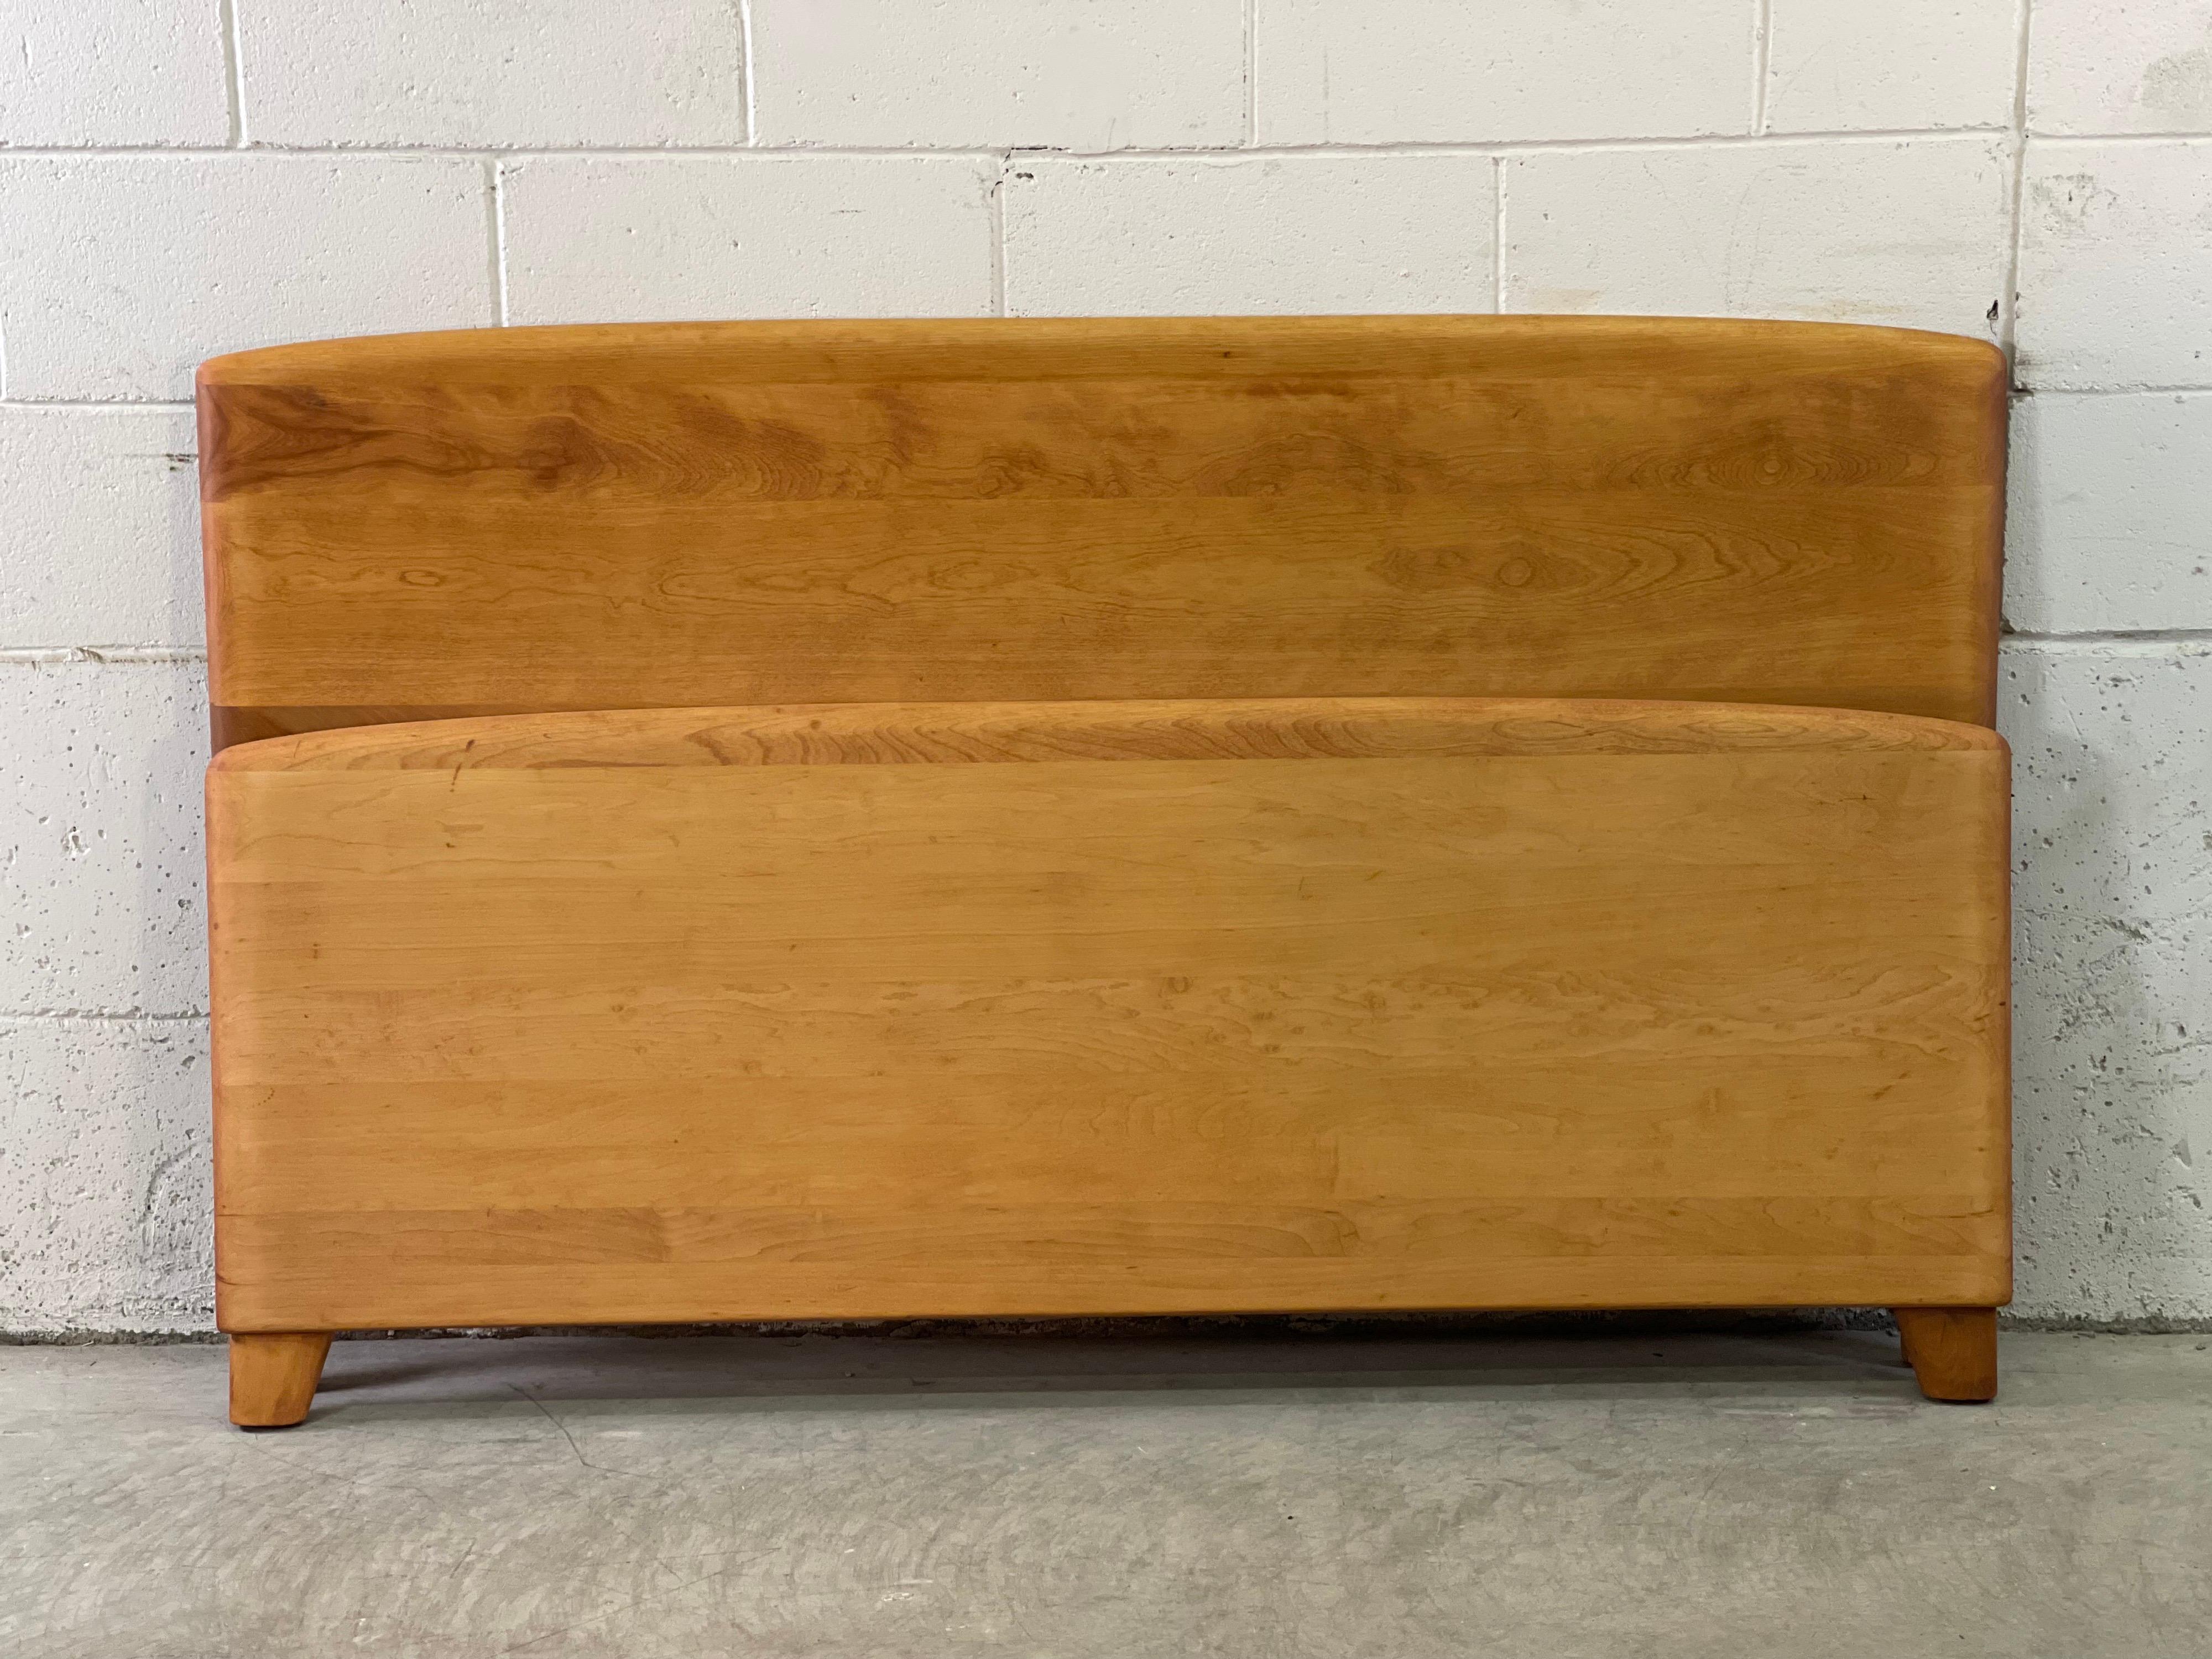 Vintage 1950s maple wood headboard and footboard set. Rails are not included. The set has been fully refinished. Footboard measures: 57” L x 23” H. Marked on the back.